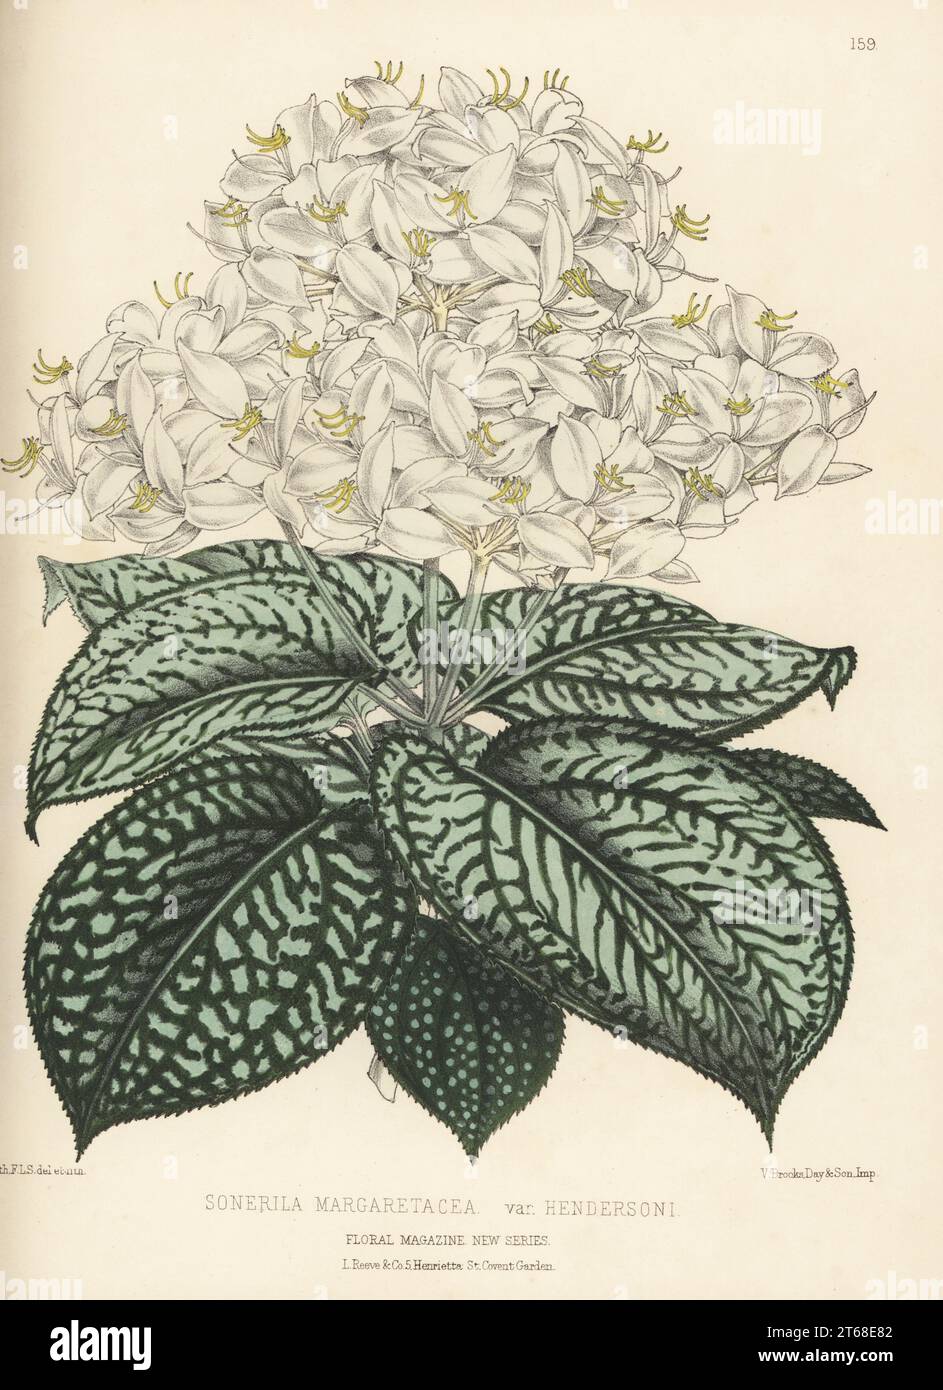 Sonerila margaritacea, native to Myanmar. Terrarium or hothouse ornamental foliage plant raised by Edward George Henderson and Sons of Wellington Nurseries, St John's Wood. Sonerila margaretacea var. Hendersoni. Handcolored botanical illustration drawn and lithographed by Worthington George Smith from Henry Honywood Dombrain's Floral Magazine, New Series, Volume 4, L. Reeve, London, 1875. Lithograph printed by Vincent Brooks, Day & Son. Stock Photo